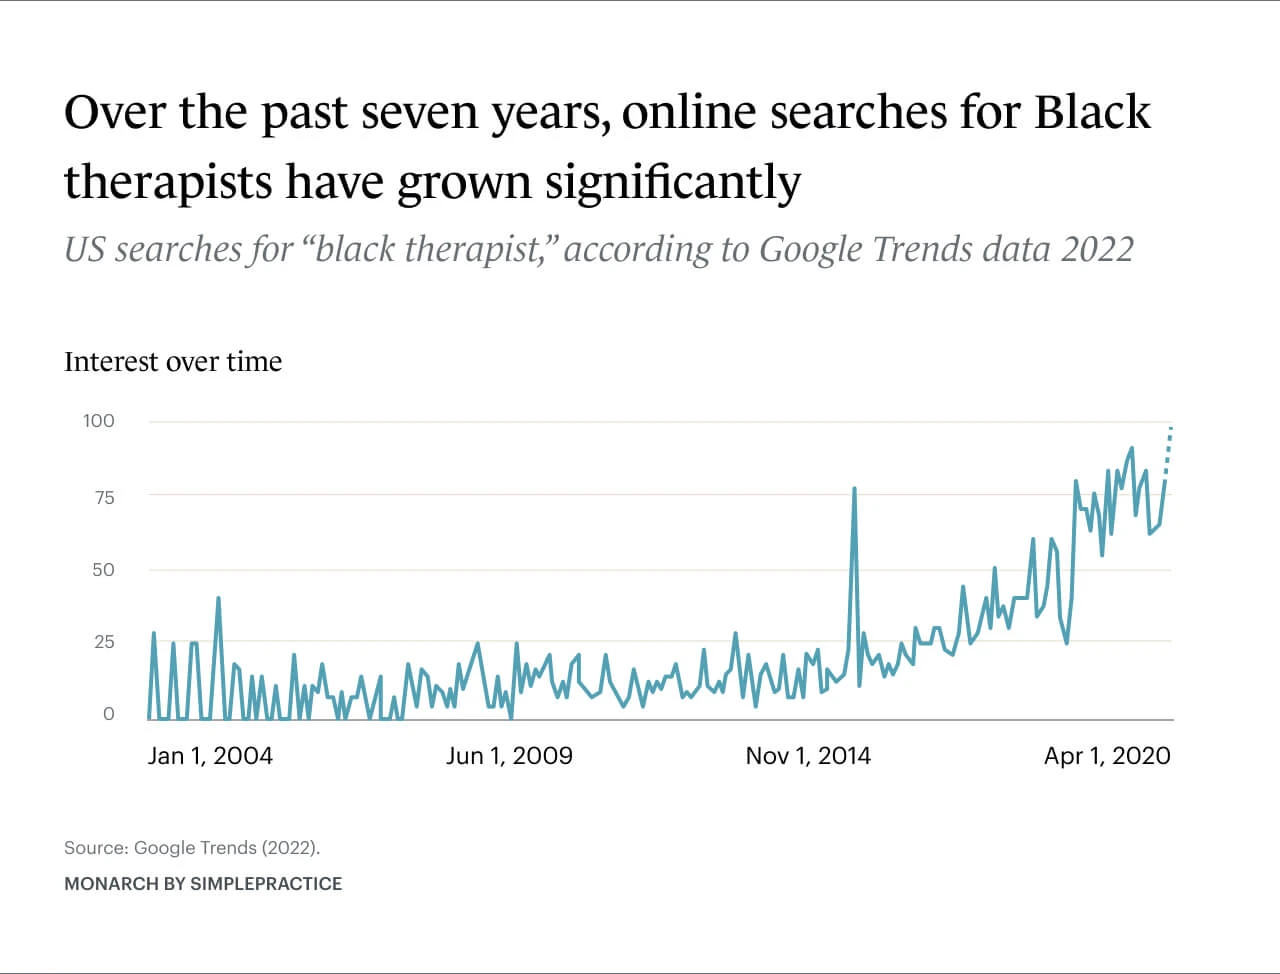 Over the past seven years, Americans' Google searches for Black therapists have grown significantly.